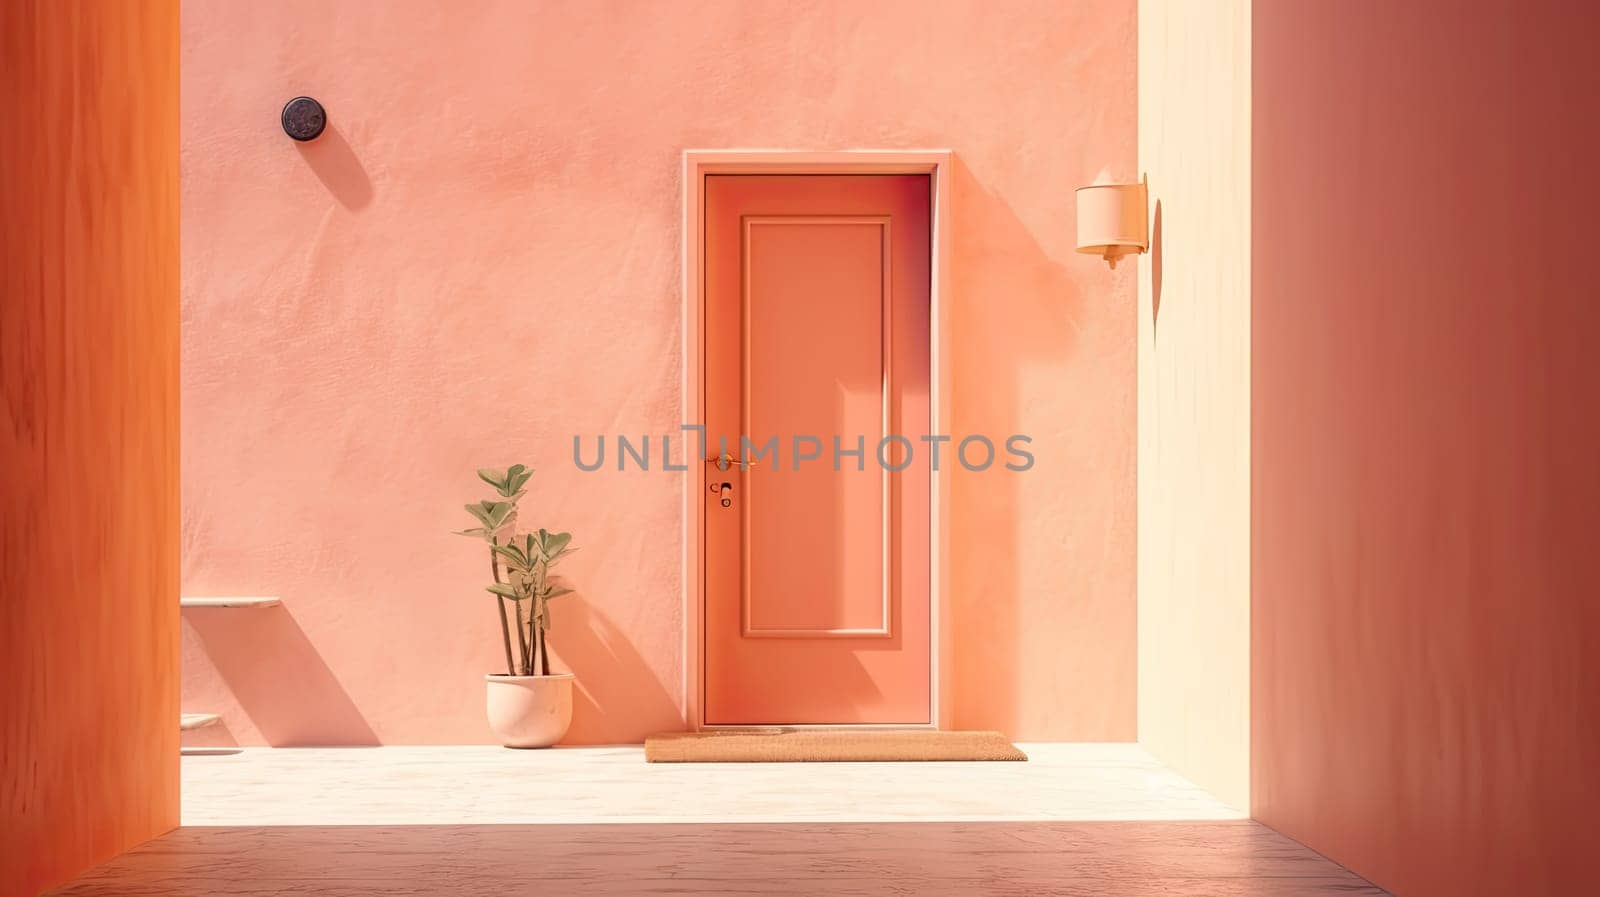 Background for your product. Plastered wall, door and shadows